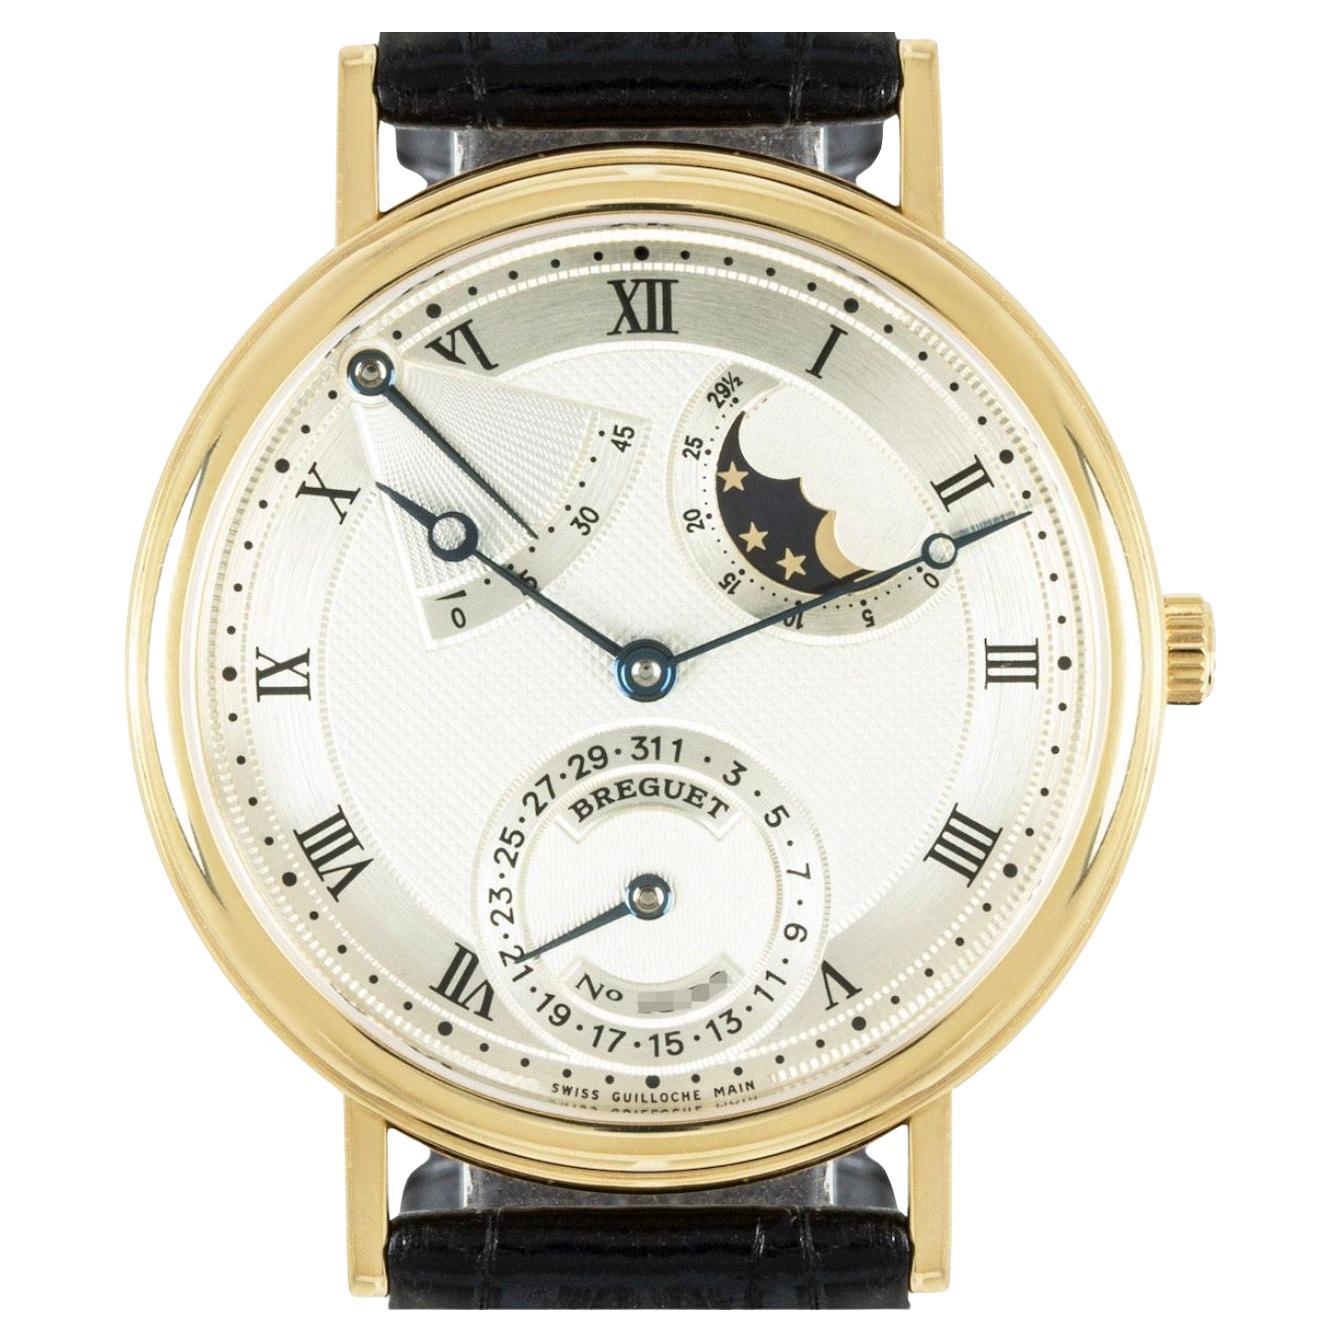 A Classique wristwatch in yellow gold by Breguet. Featuring a silvered dial with a textured guilloche pattern, a power reserve as well as a moon phase indicator and a yellow gold bezel.

Equipped with a generic black leather strap and a yellow gold